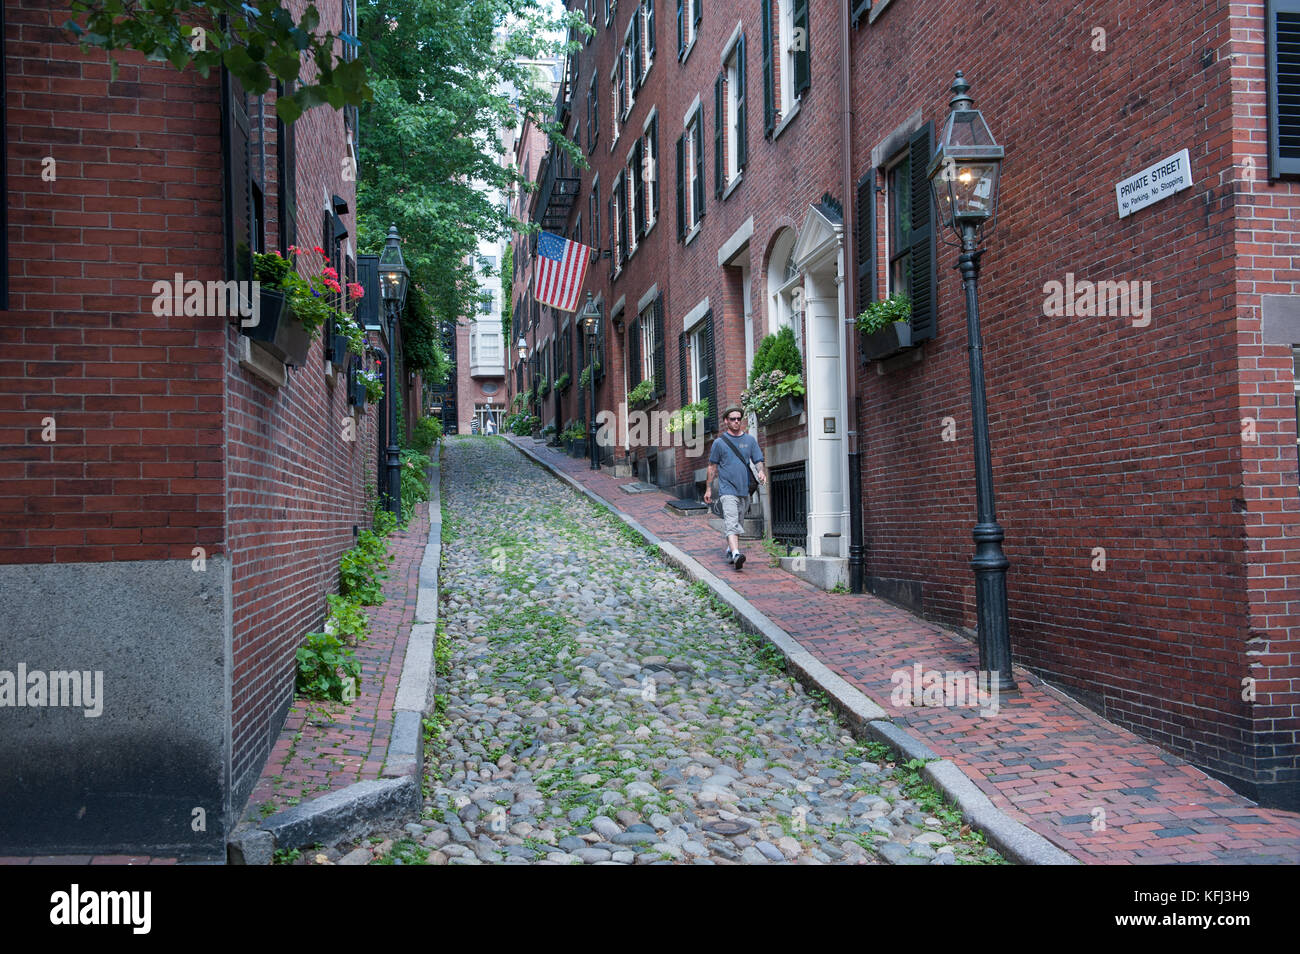 Acorn Street in Beacon Hill, which is a historic residential area in Boston, Massachusetts Stock Photo